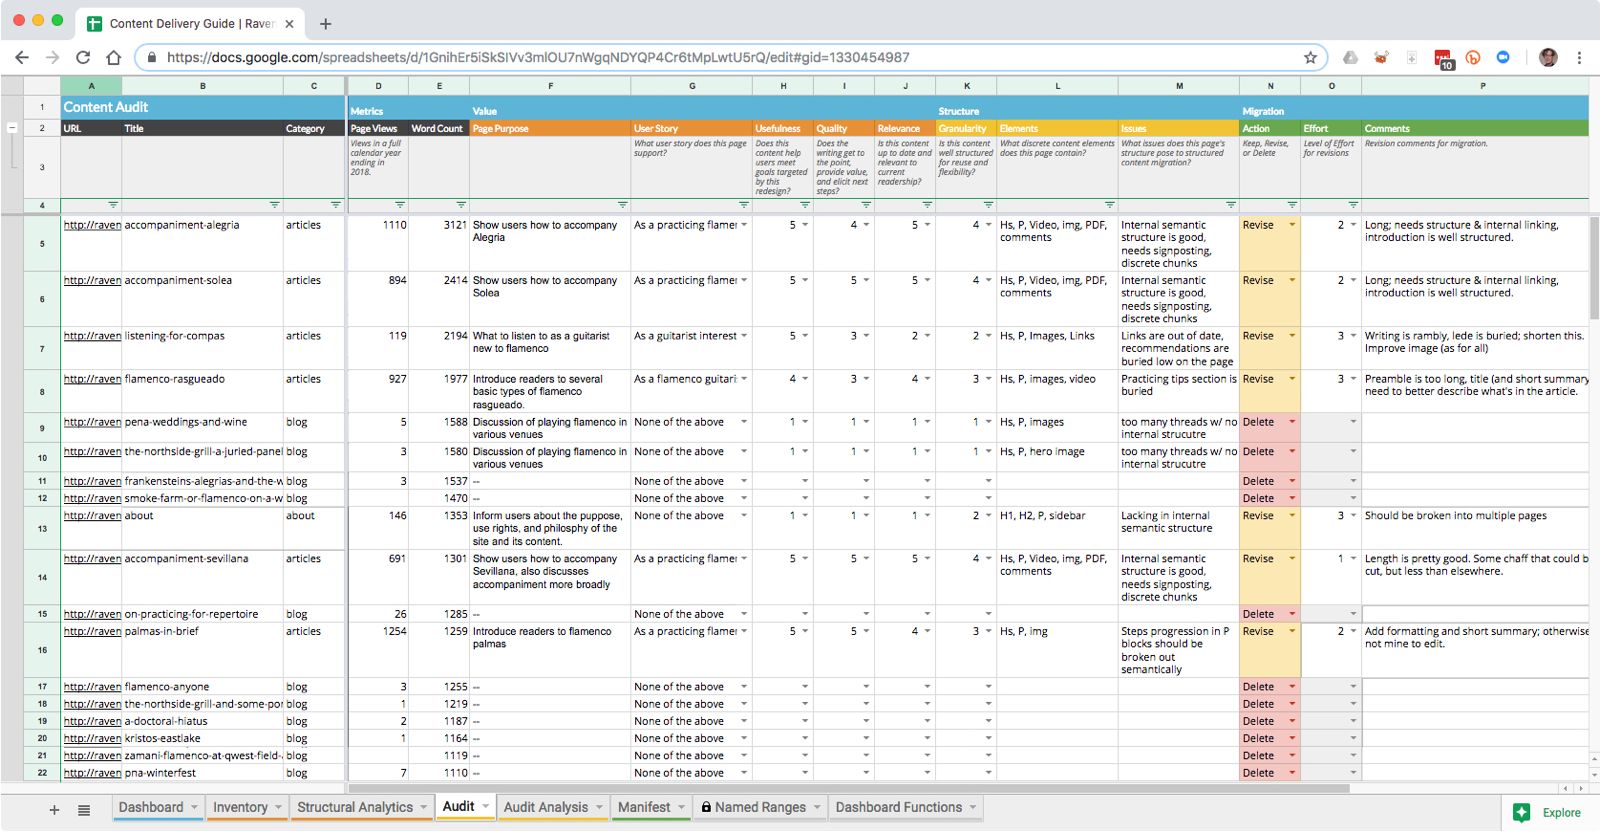 A screenshot of a spreadsheet depiction of the Ravenna Flamenco content manifest